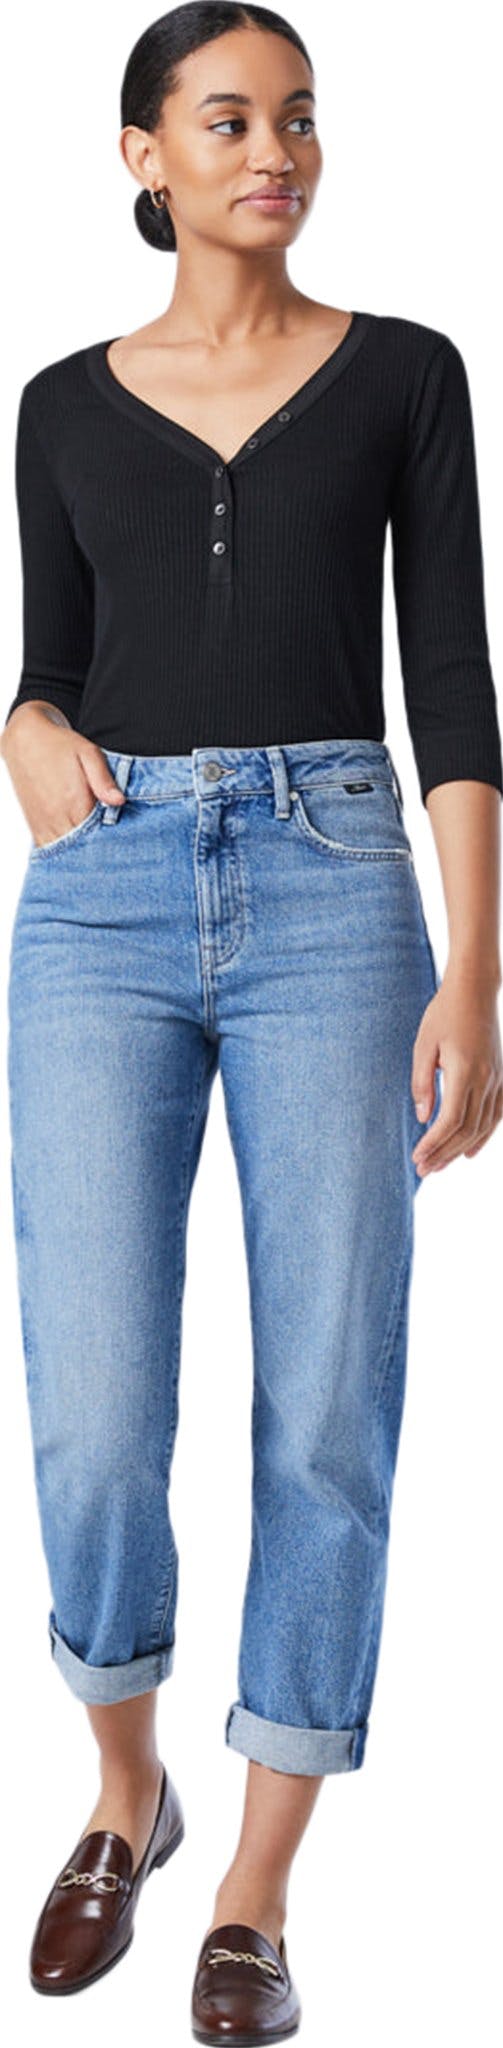 Product image for Soho High Rise Tapered Leg Jeans - Women's